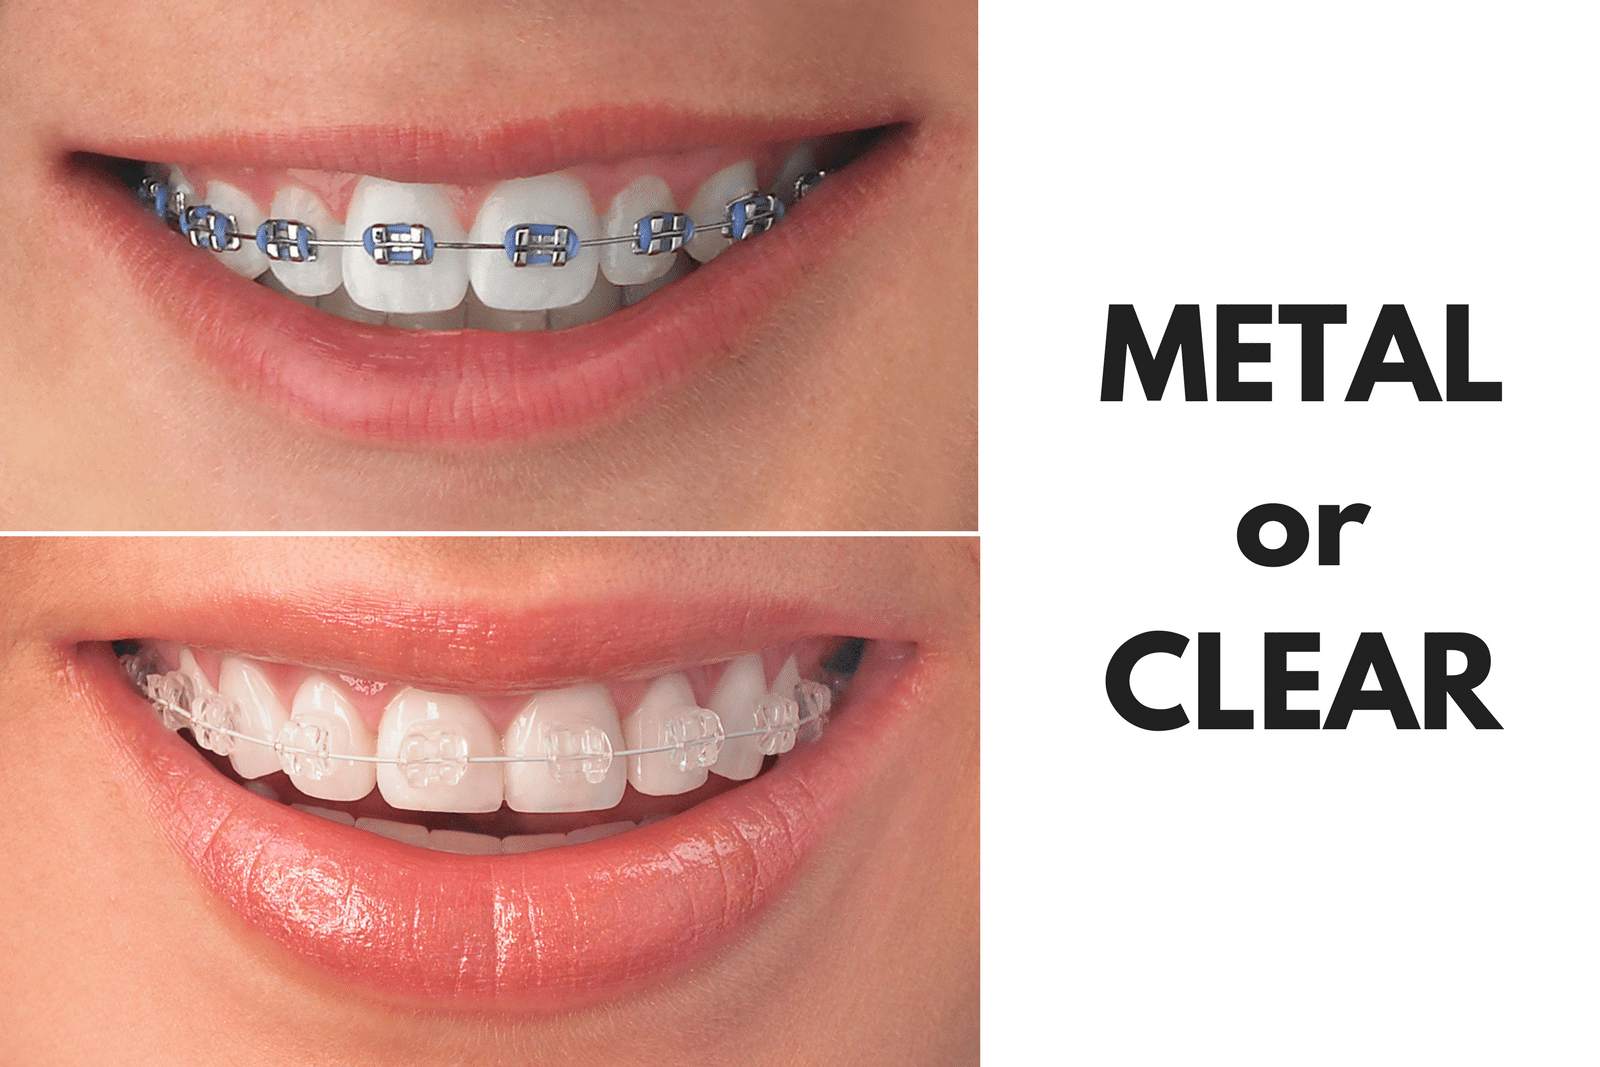 Ask Your Cuero Dentist: Should I Get Metal or Clear Braces?